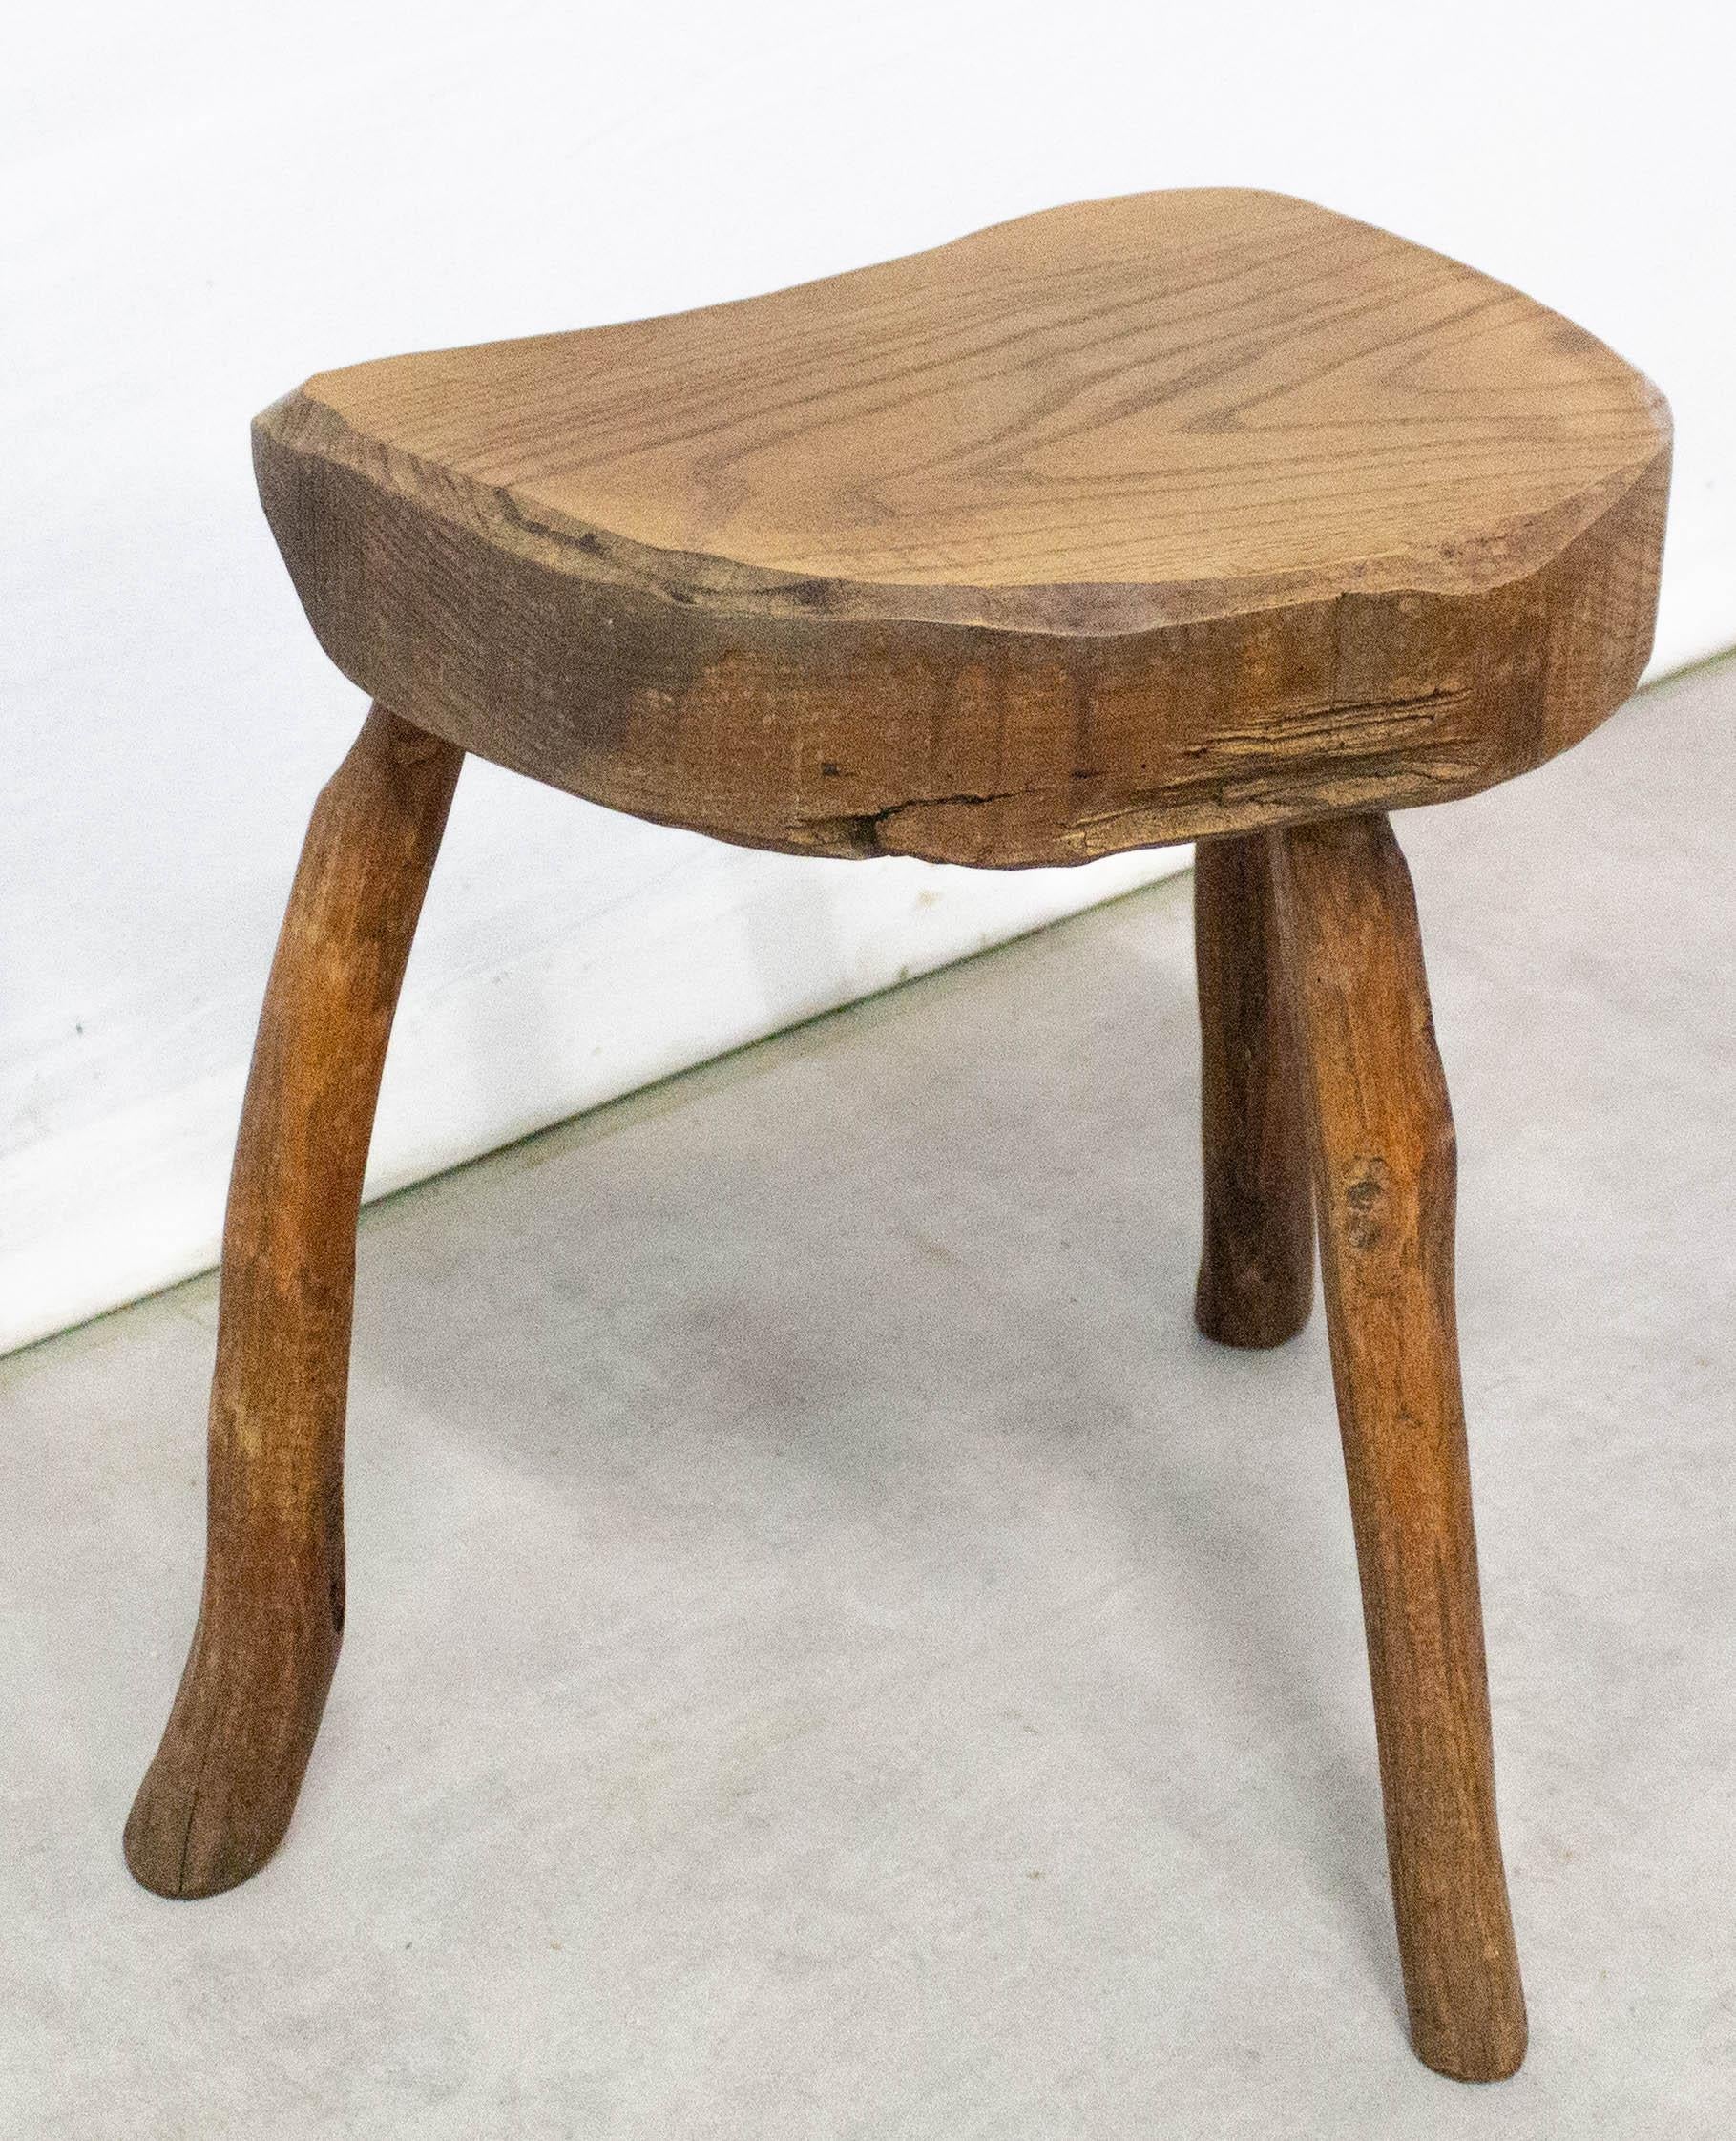 Milking stool or three-leg stool, Brutalist, 1970, France
Elm
Very good vintage condition.

For shipping: 48 x 30 x 44 cm 3.7 kg.